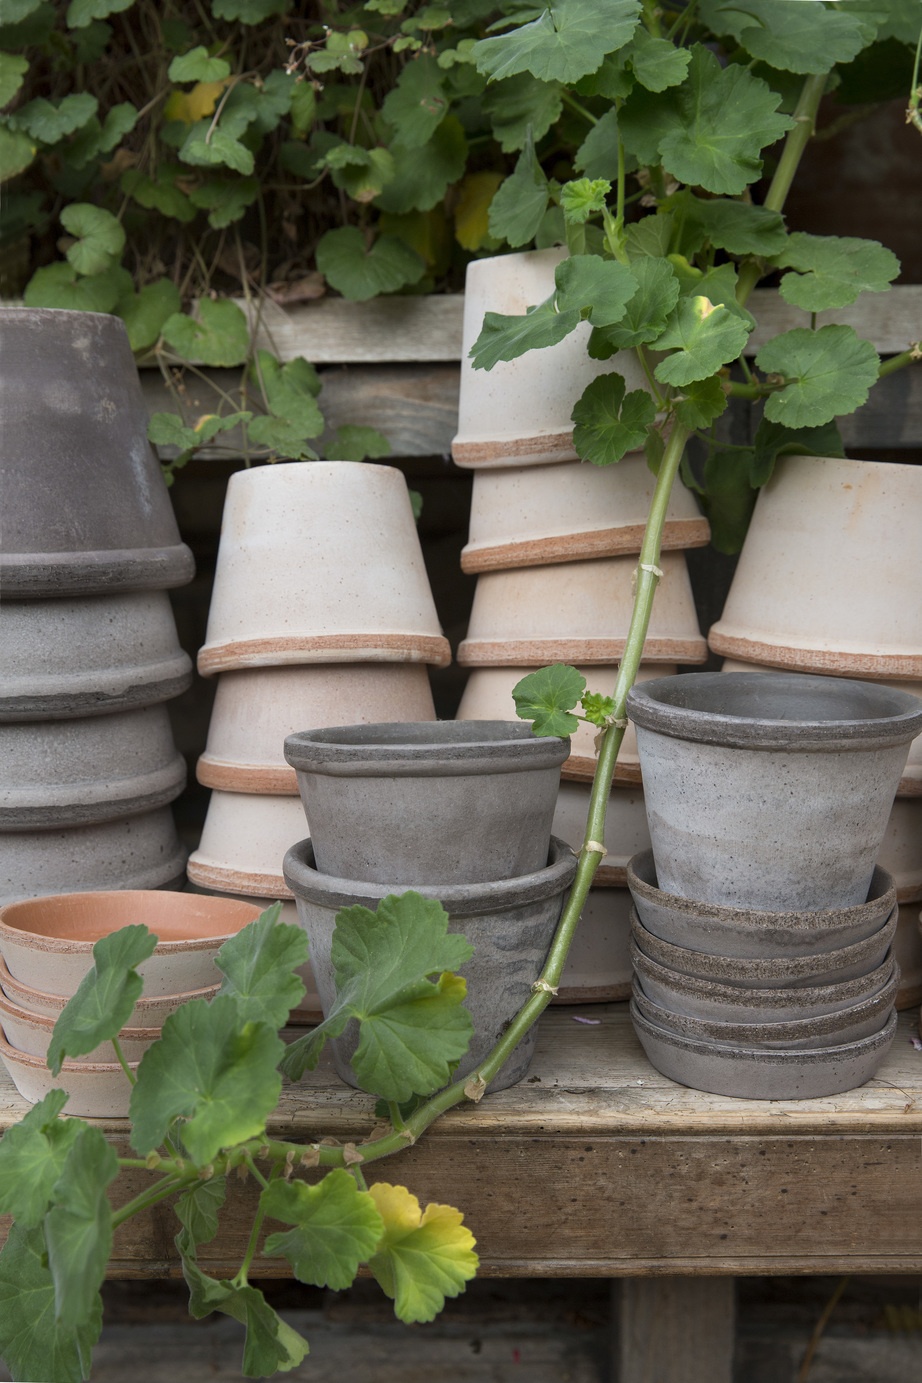 Collection of grey and rose raw pots surrounded by plants.